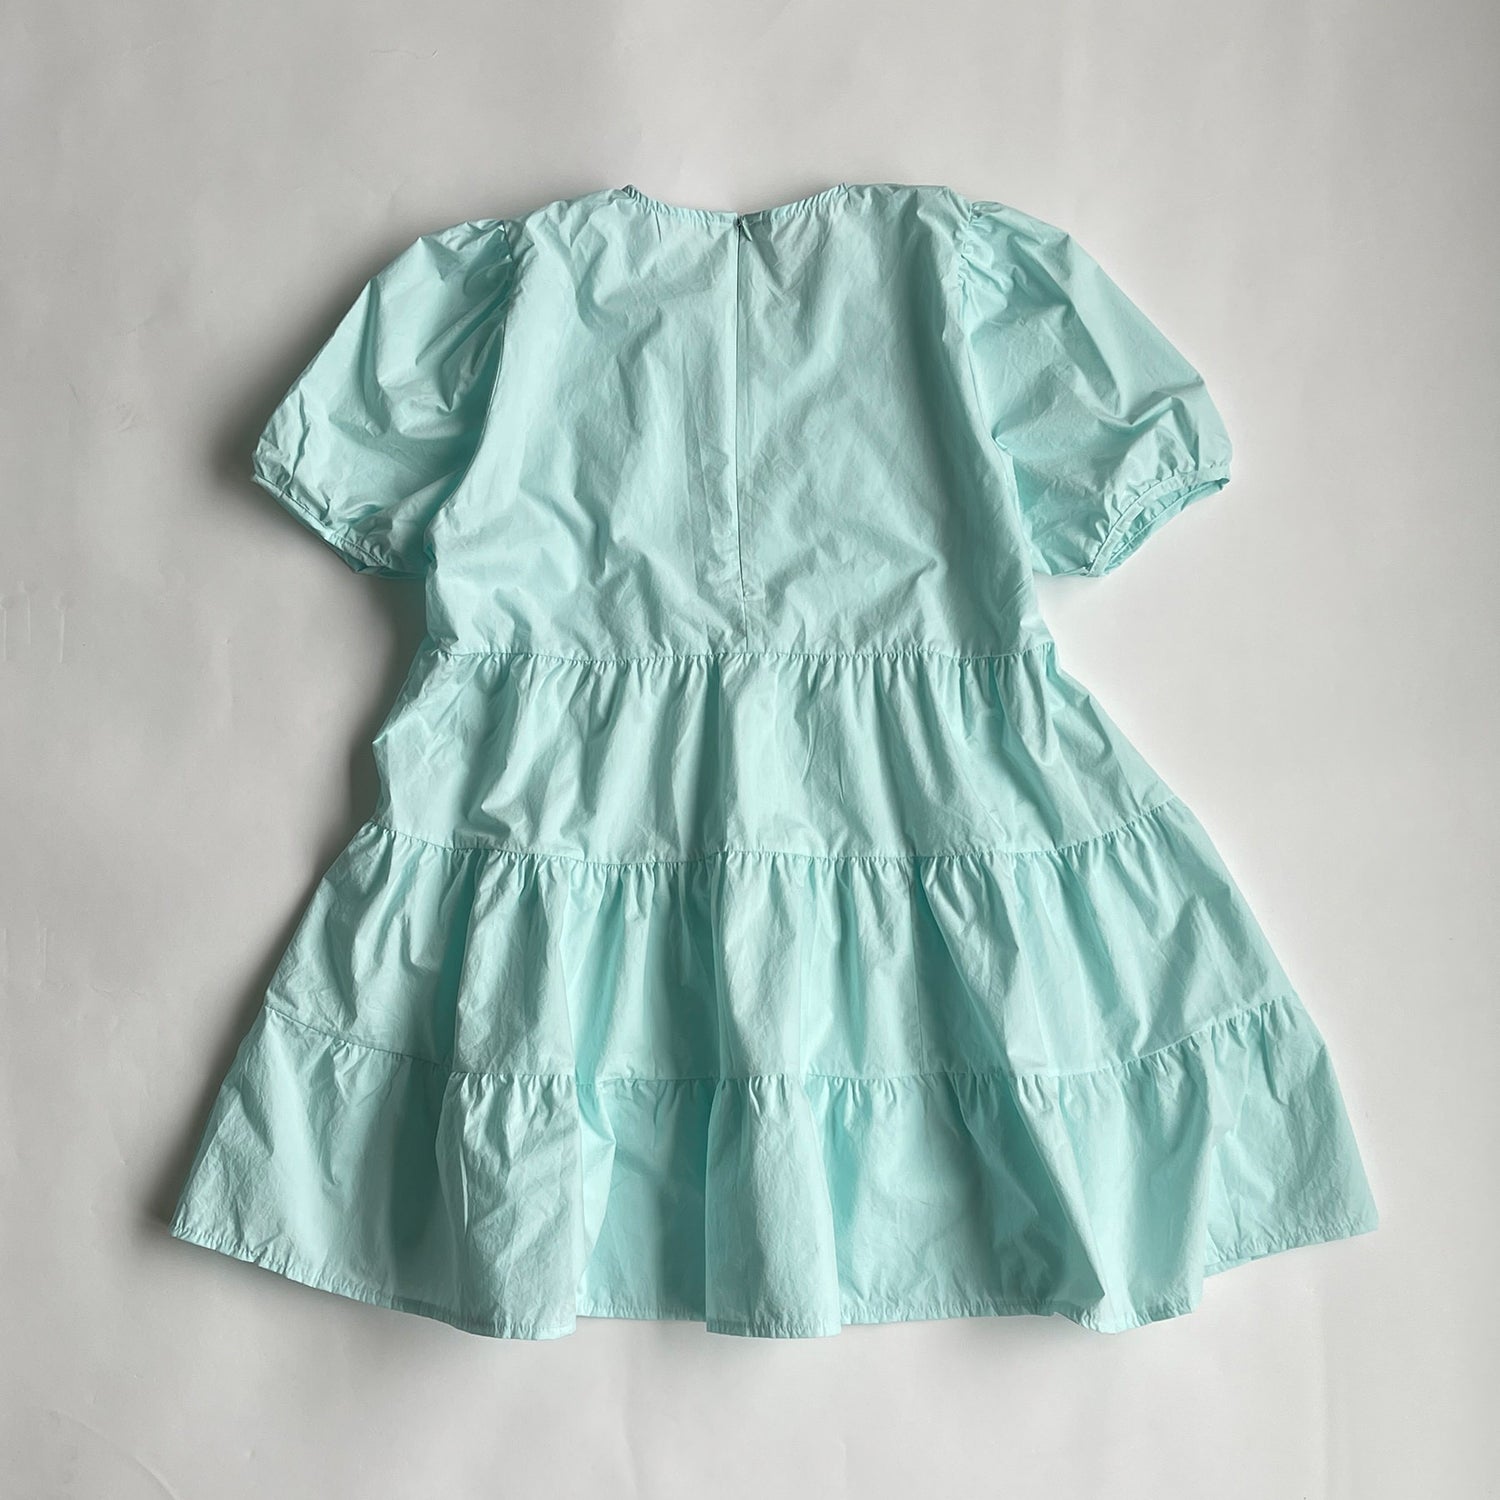 【SAMPLE】tiered tunic one piece / blue